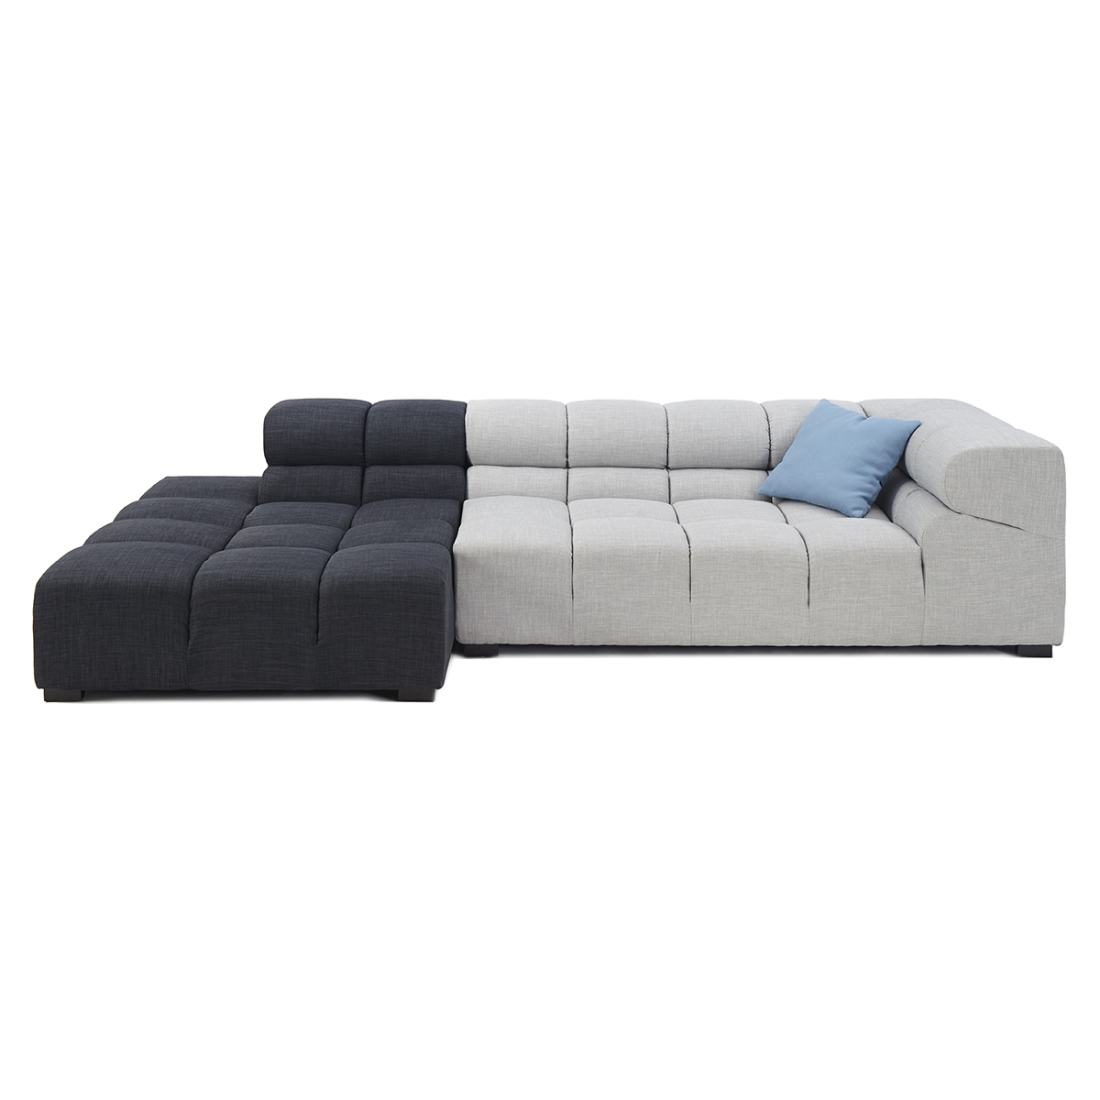 Tufted Sofa | Sectional 003
